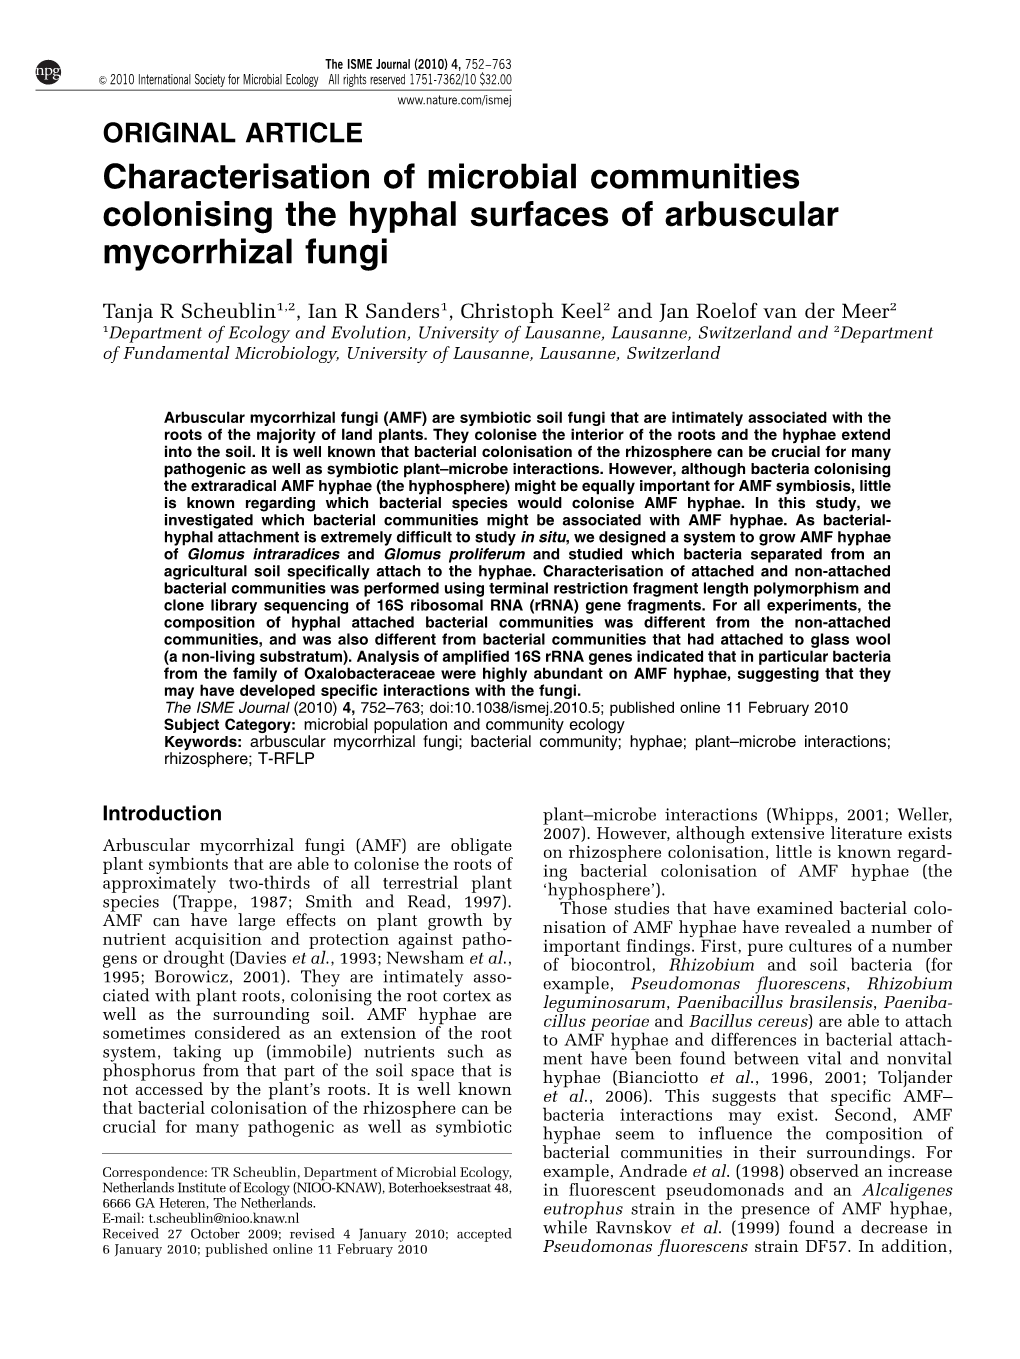 Characterisation of Microbial Communities Colonising the Hyphal Surfaces of Arbuscular Mycorrhizal Fungi